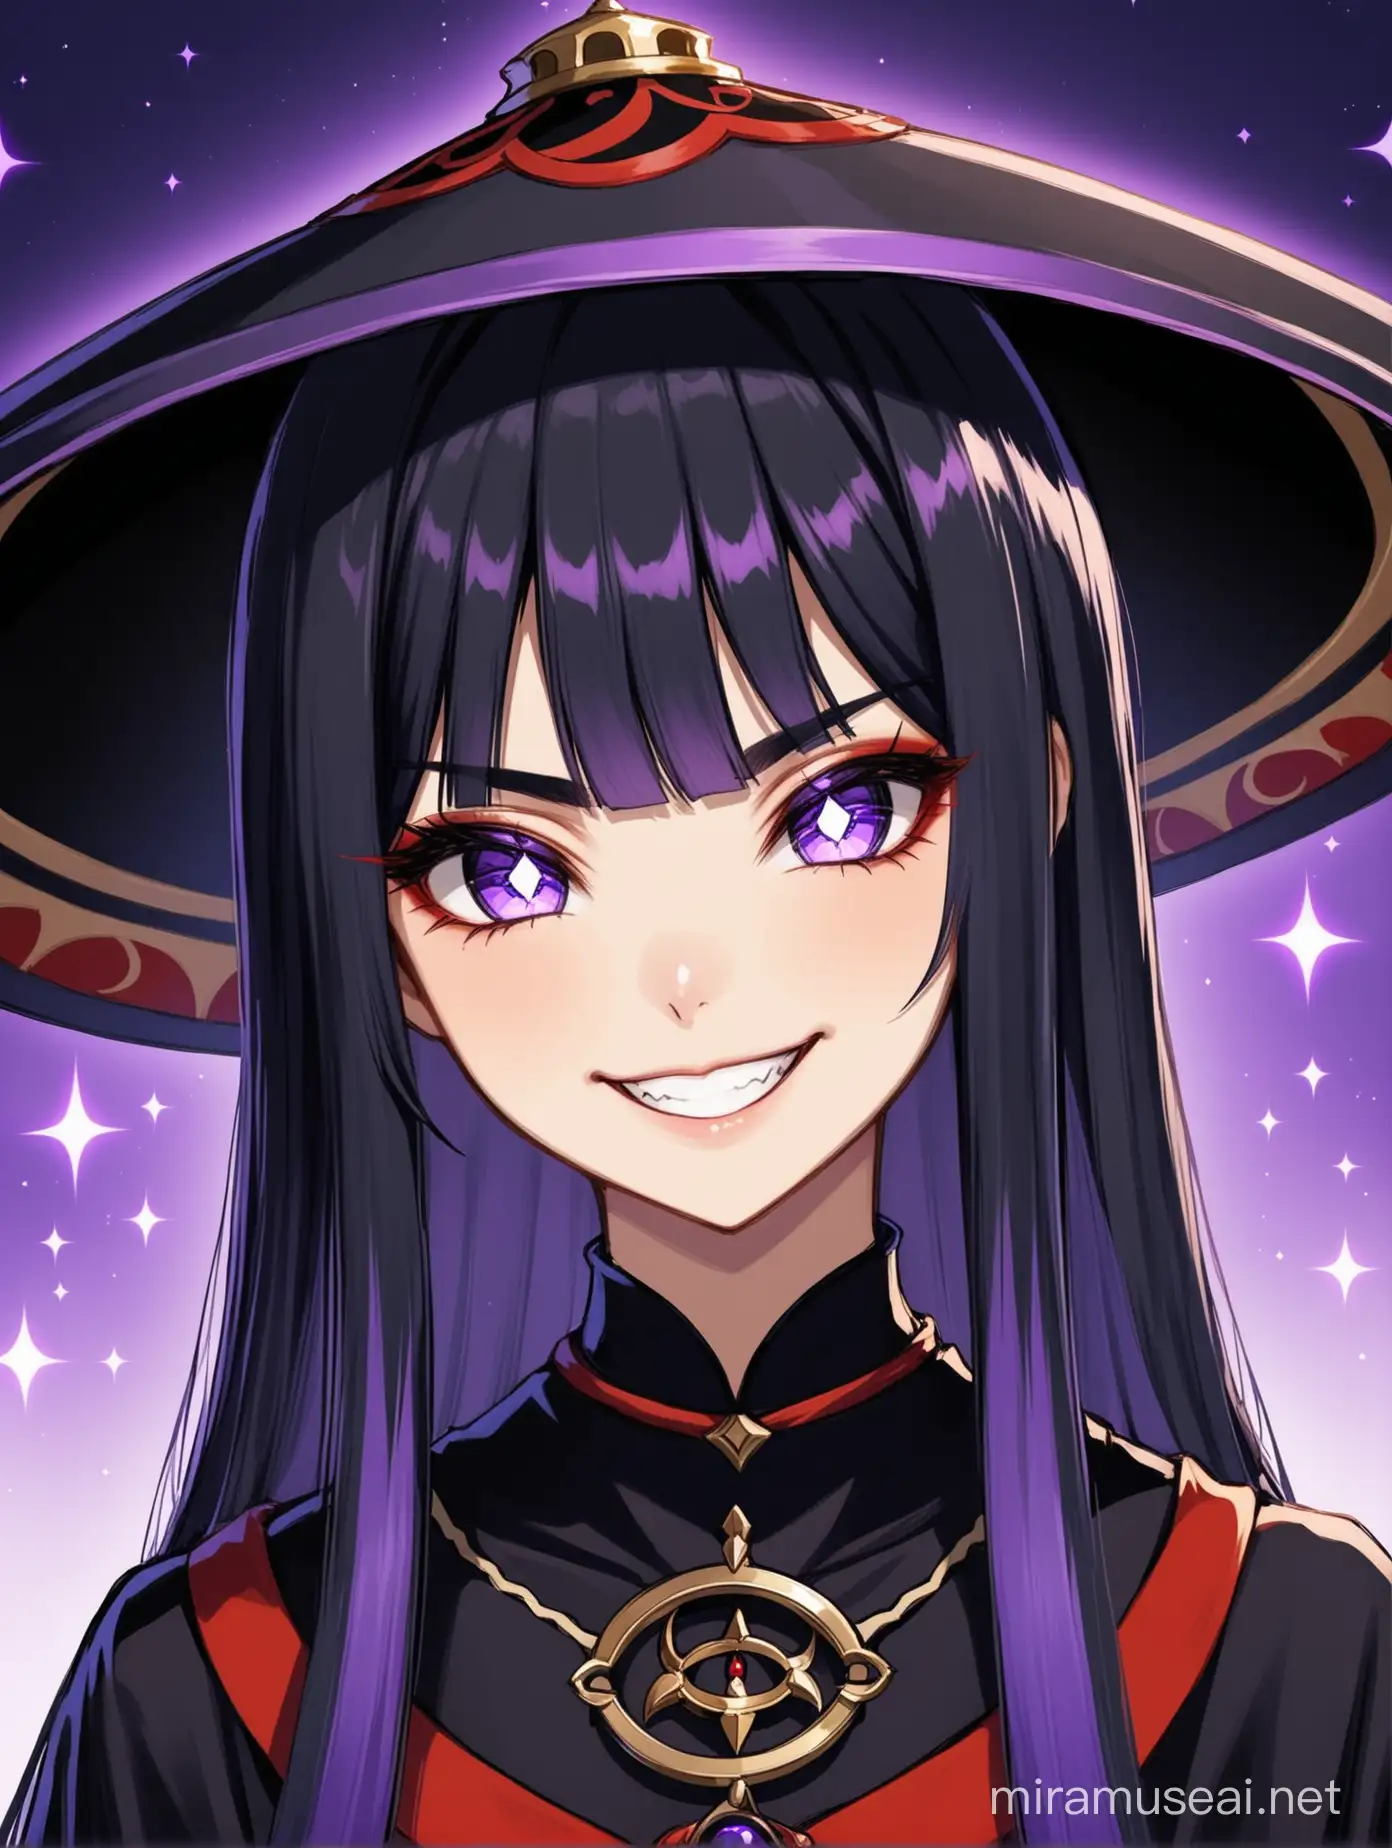 A 19 year old woman with straight charcoal purple long hair and bangs, her eye color matching her hair color. She has red eyeliner on, and she is evily smirking. She wears the same thing as Scaramouche from Genshin Impact. She has the Kasa hat of Scaramouche from genshin impact. She is evil